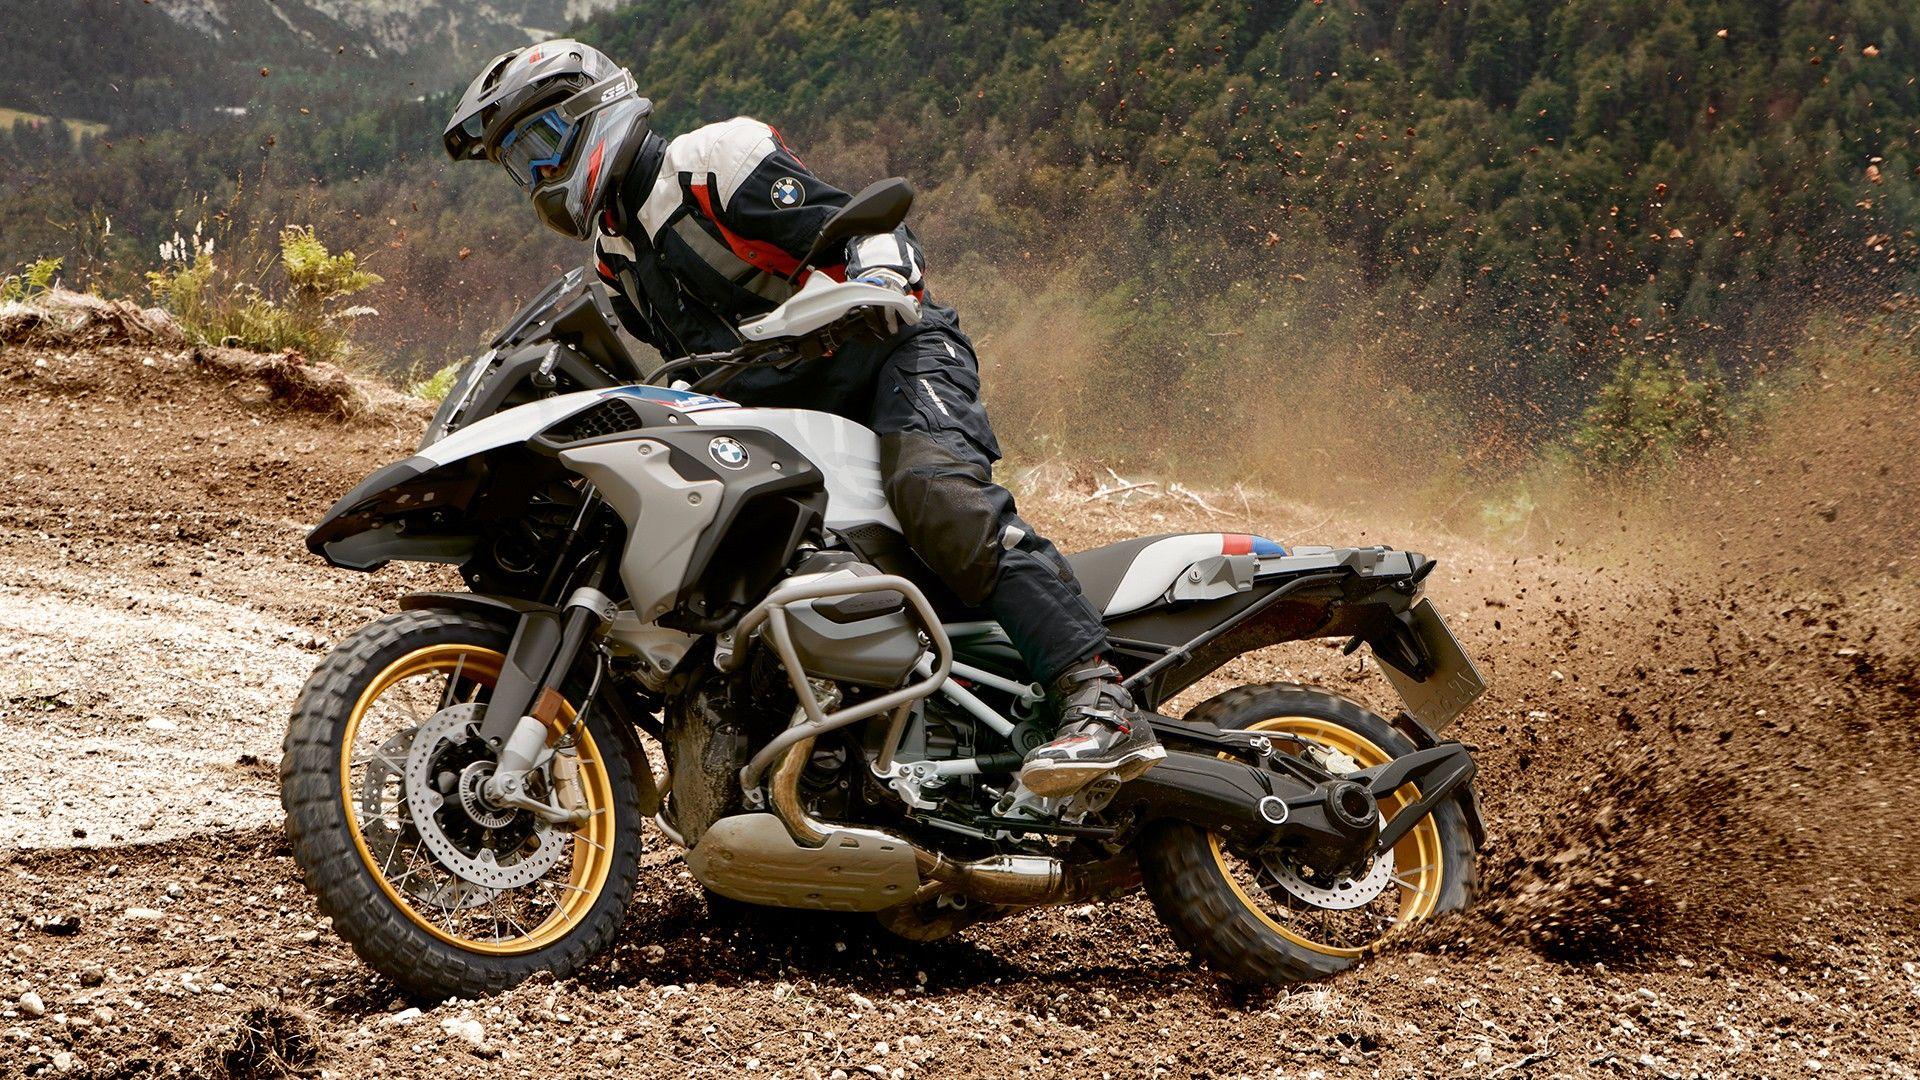 BMW R 1250 GS Wallpapers - Top Free BMW R 1250 GS Backgrounds